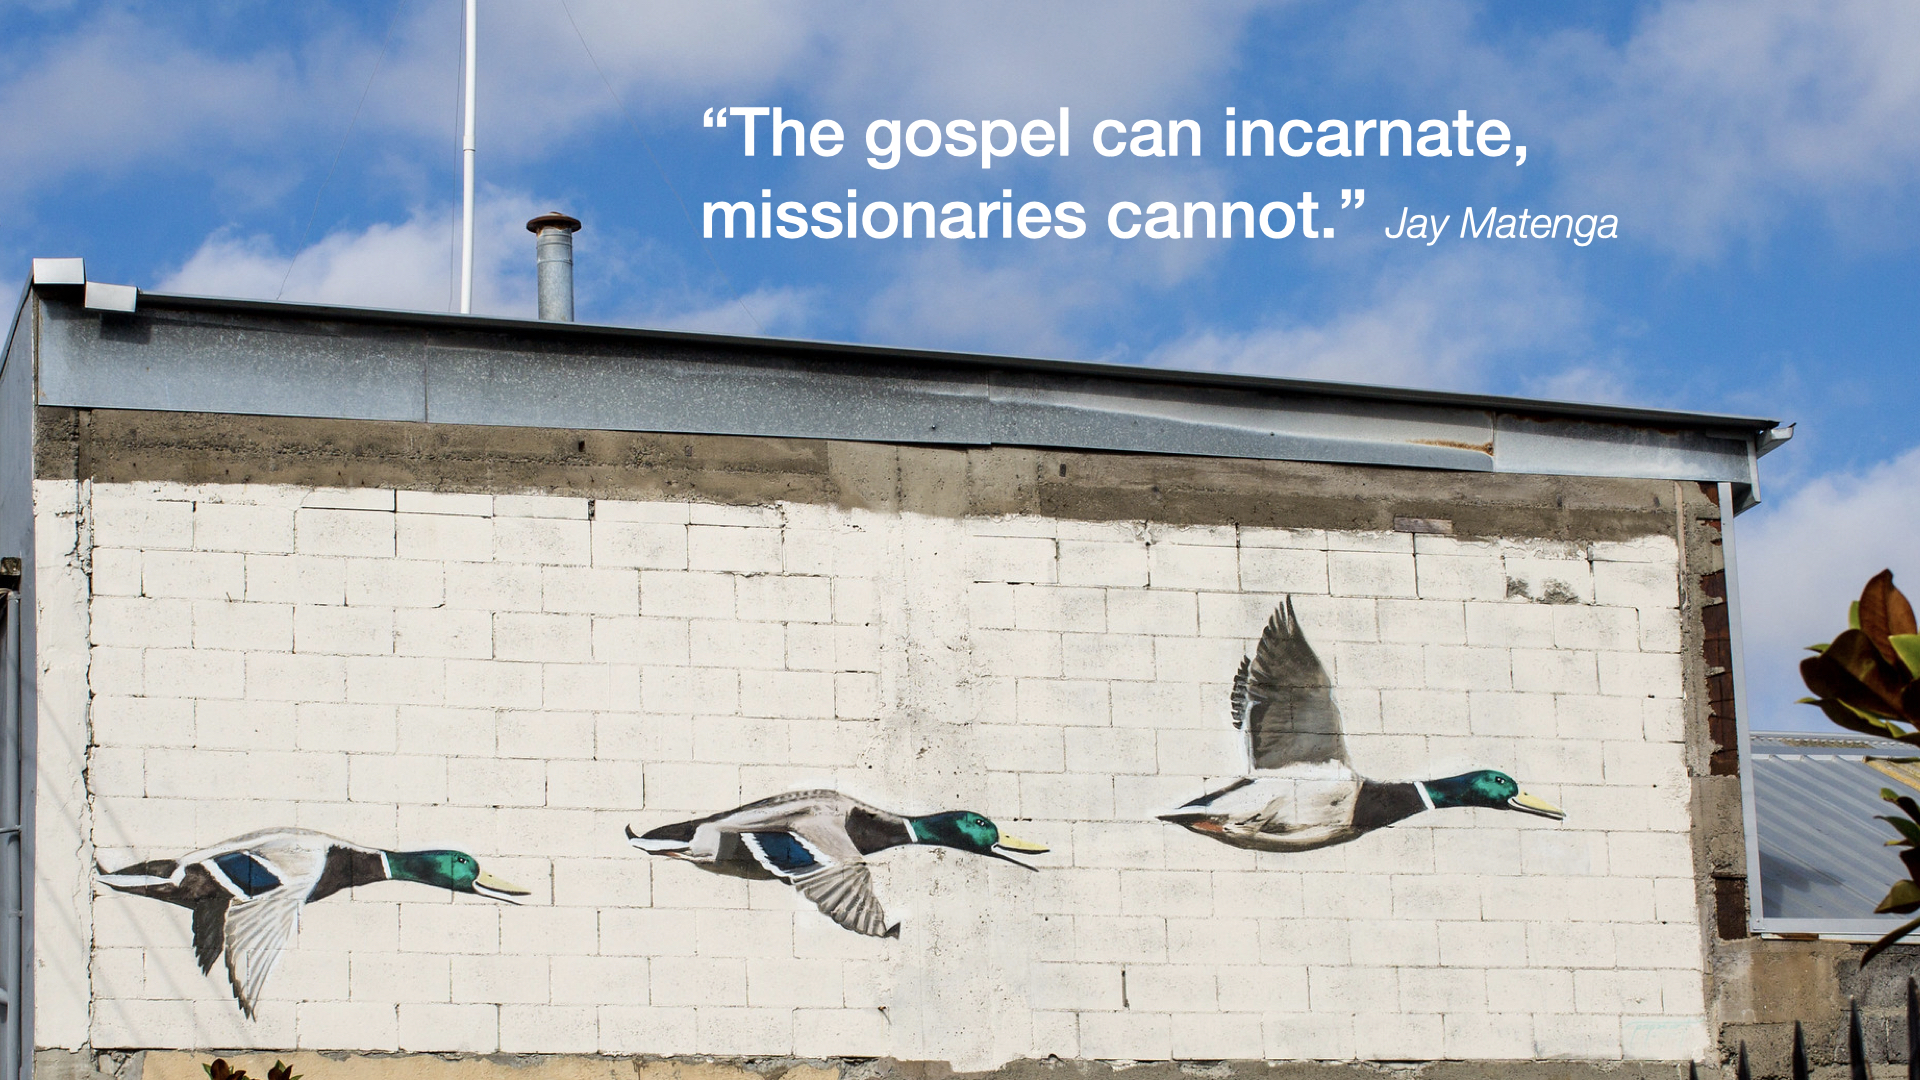 Street art with quote: "The gospel can incarnate, missionaries cannot." - Jay Matenga